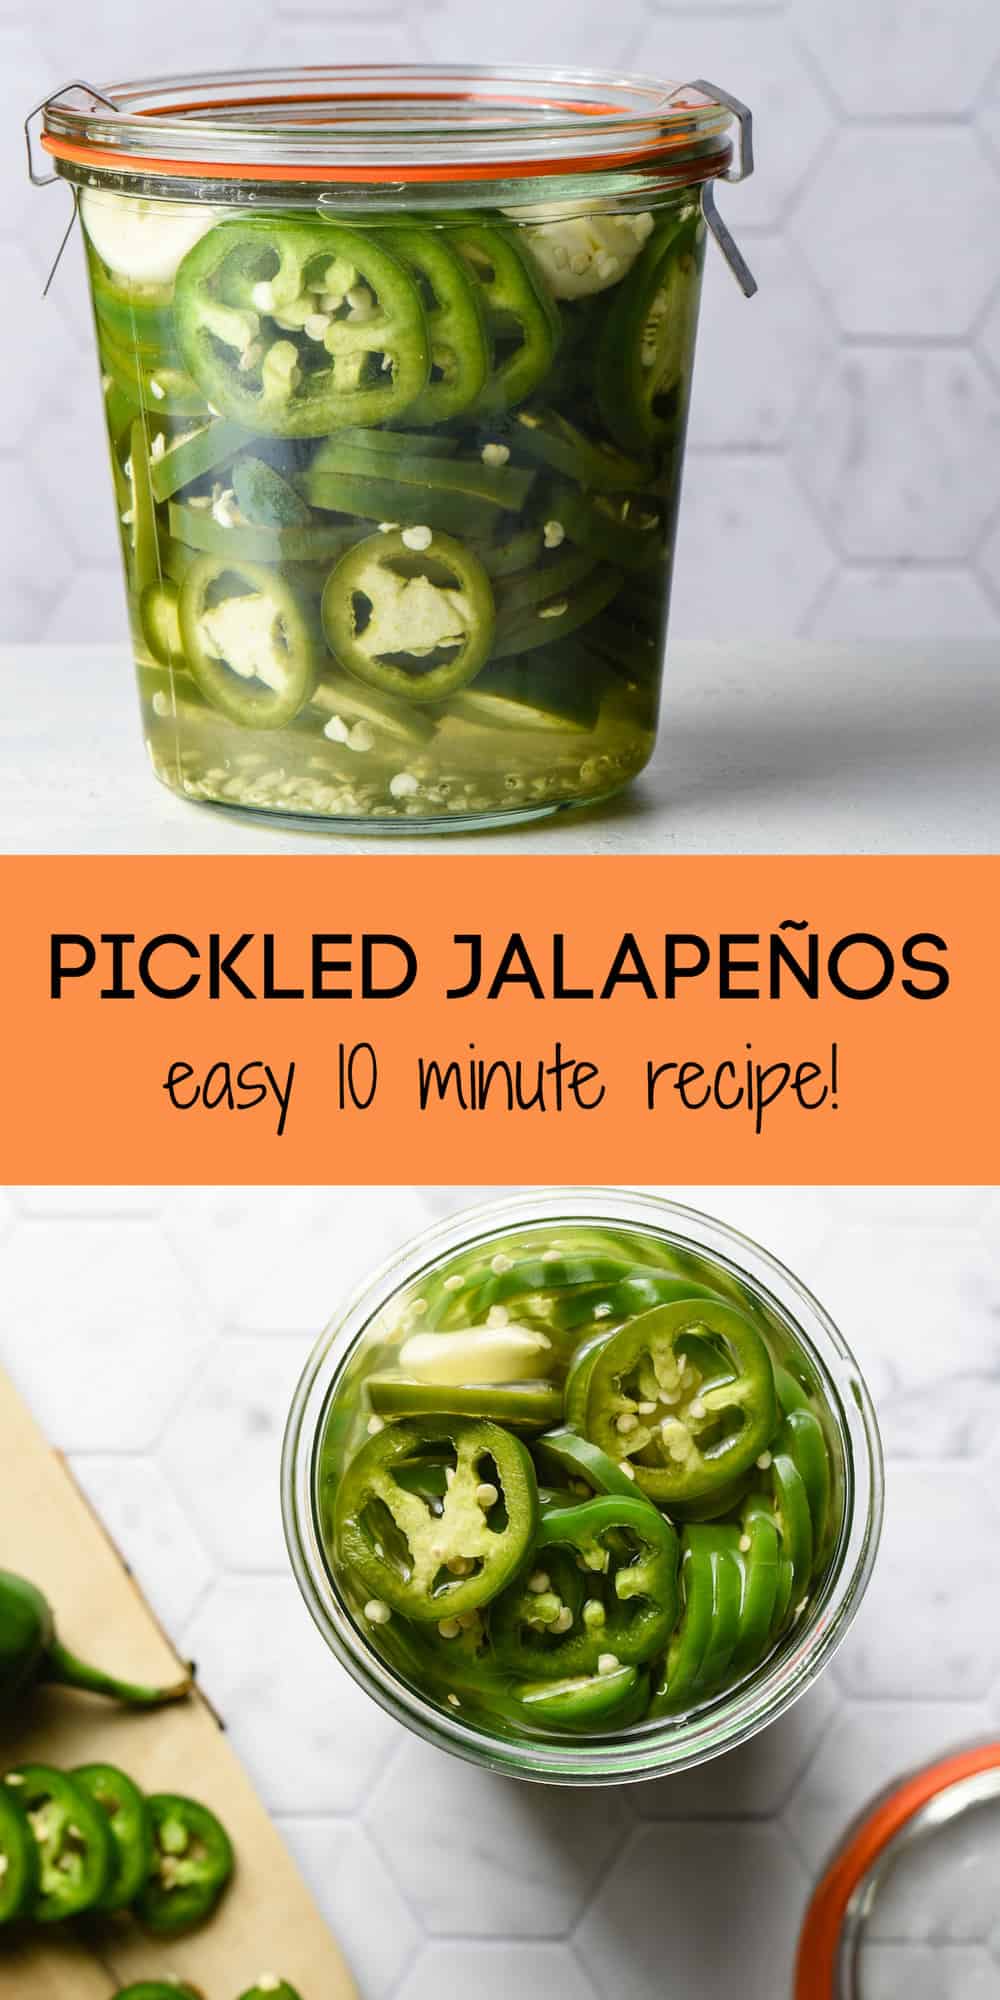 Collage of images of pickled jalapenos against light background.